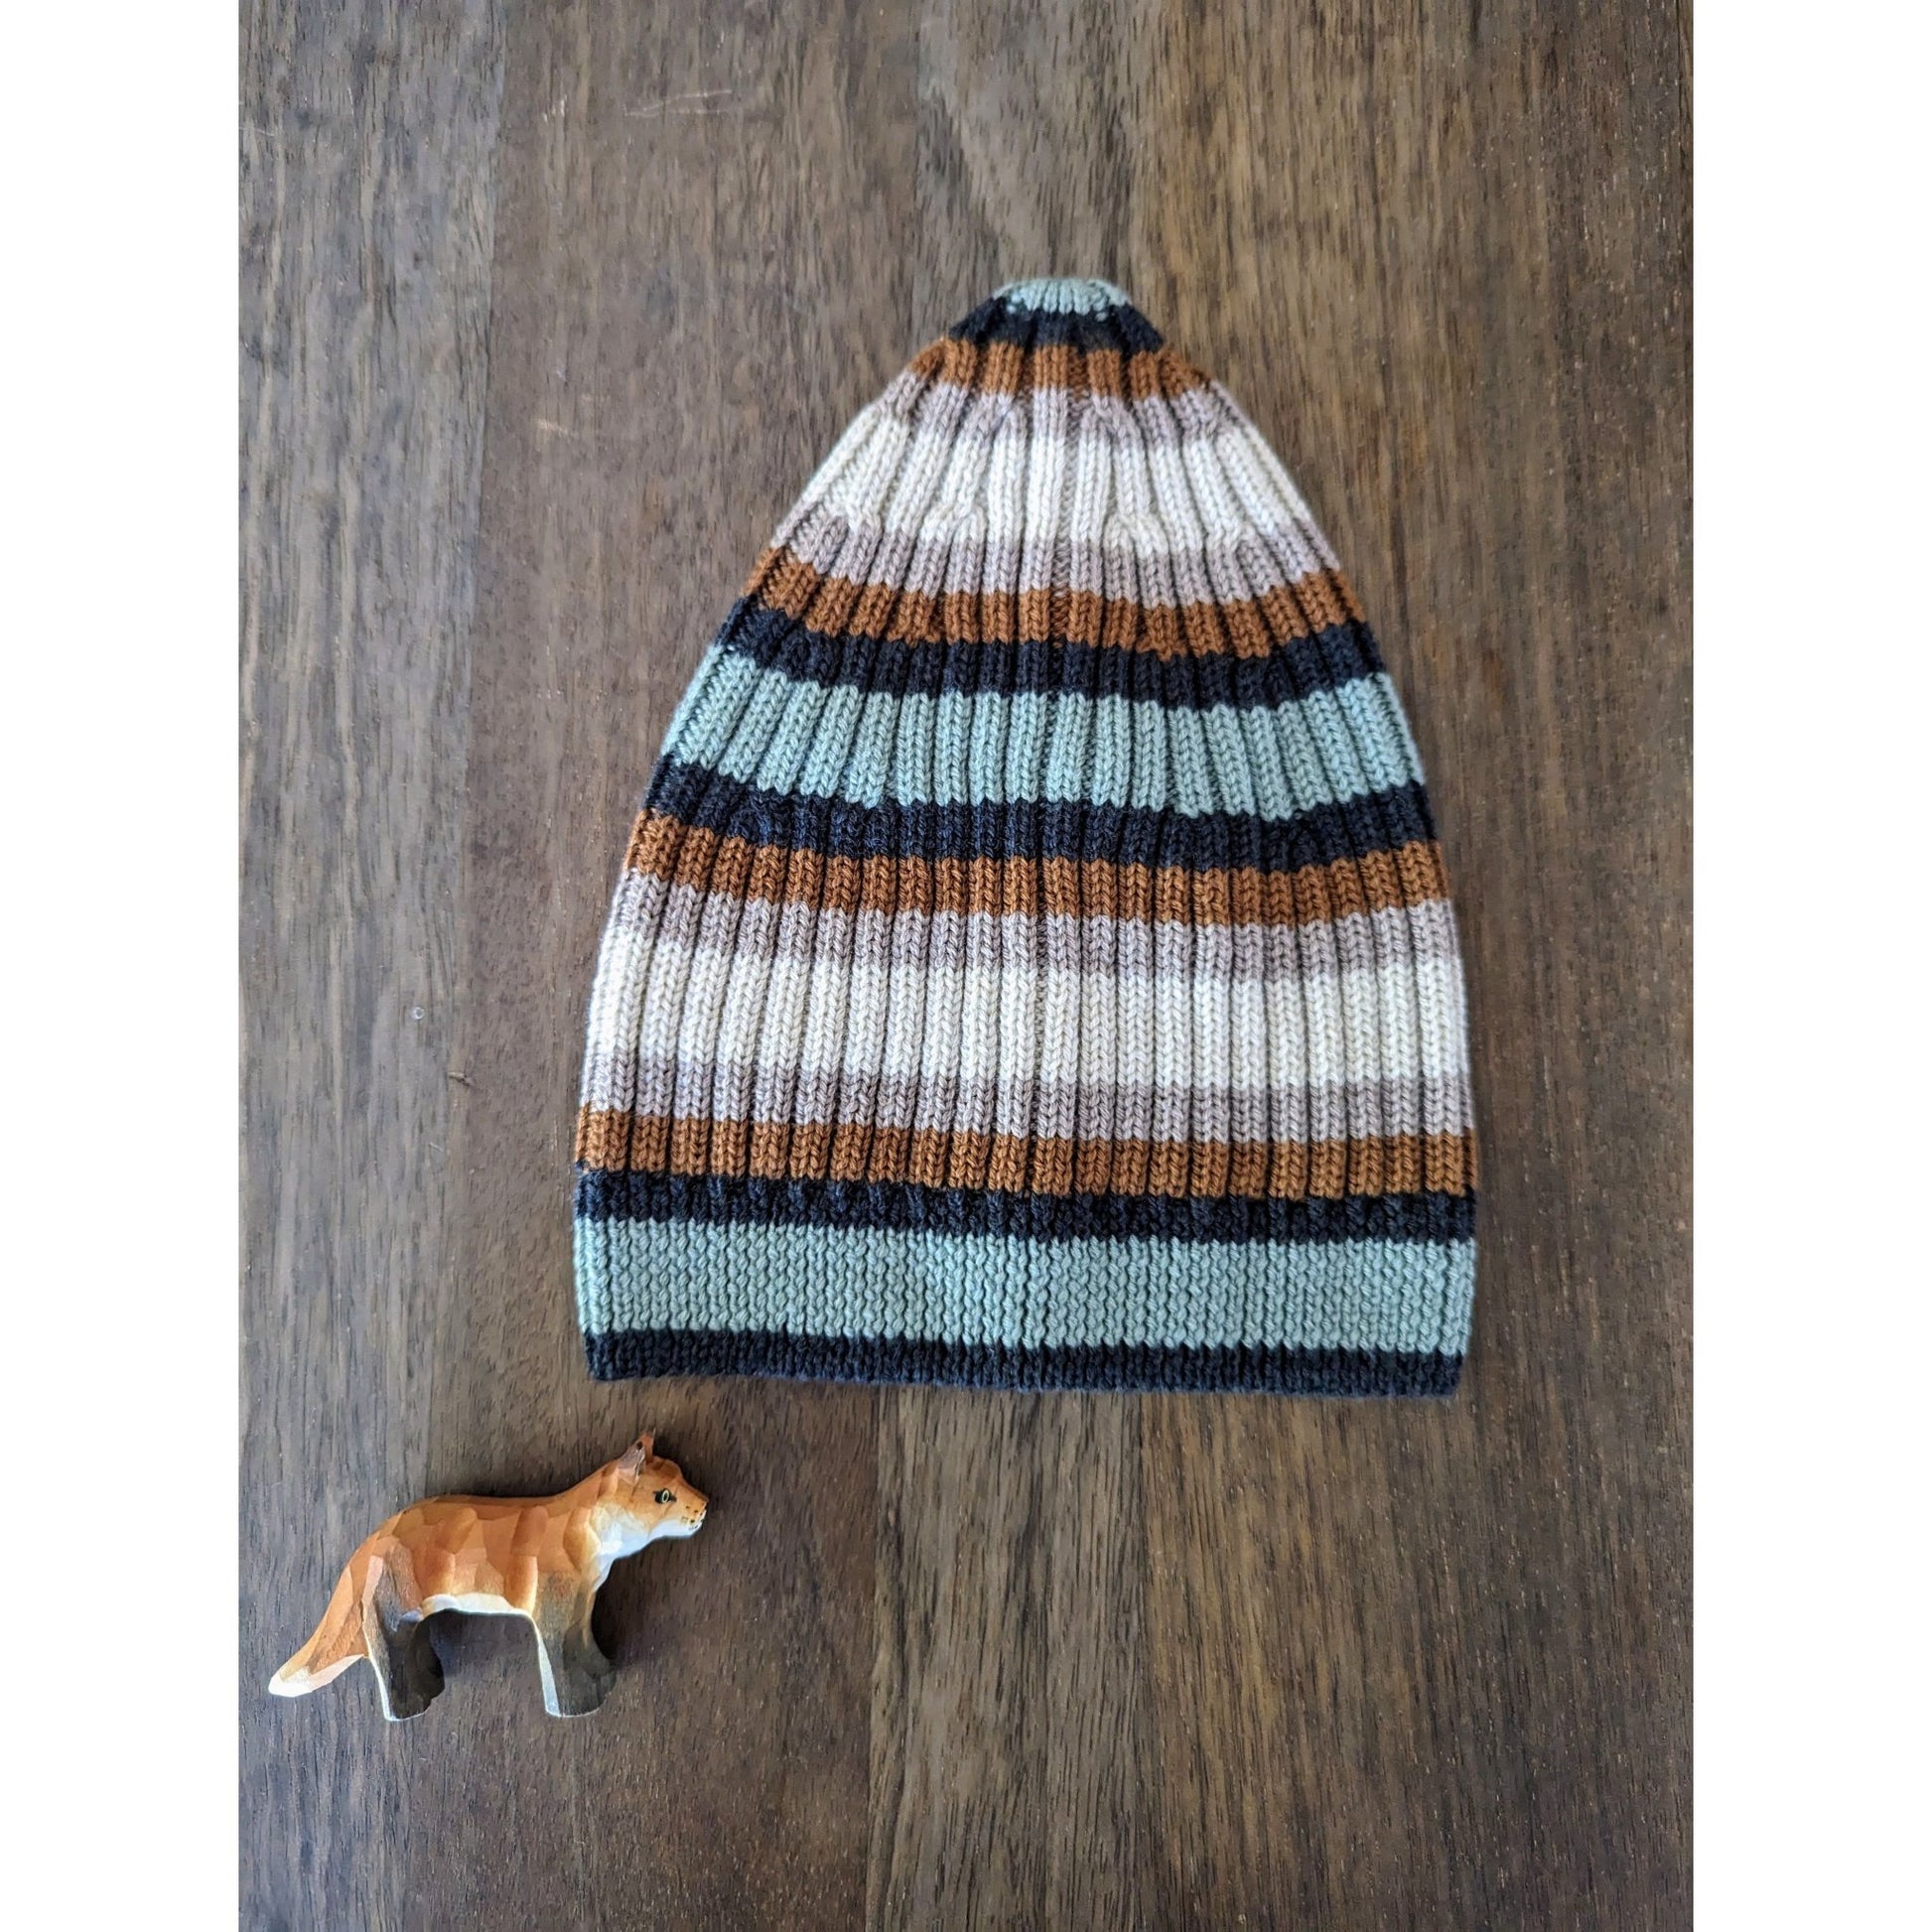 Mabli - Coblyn Beanie - Kids and Adults - Nature's Wild Child